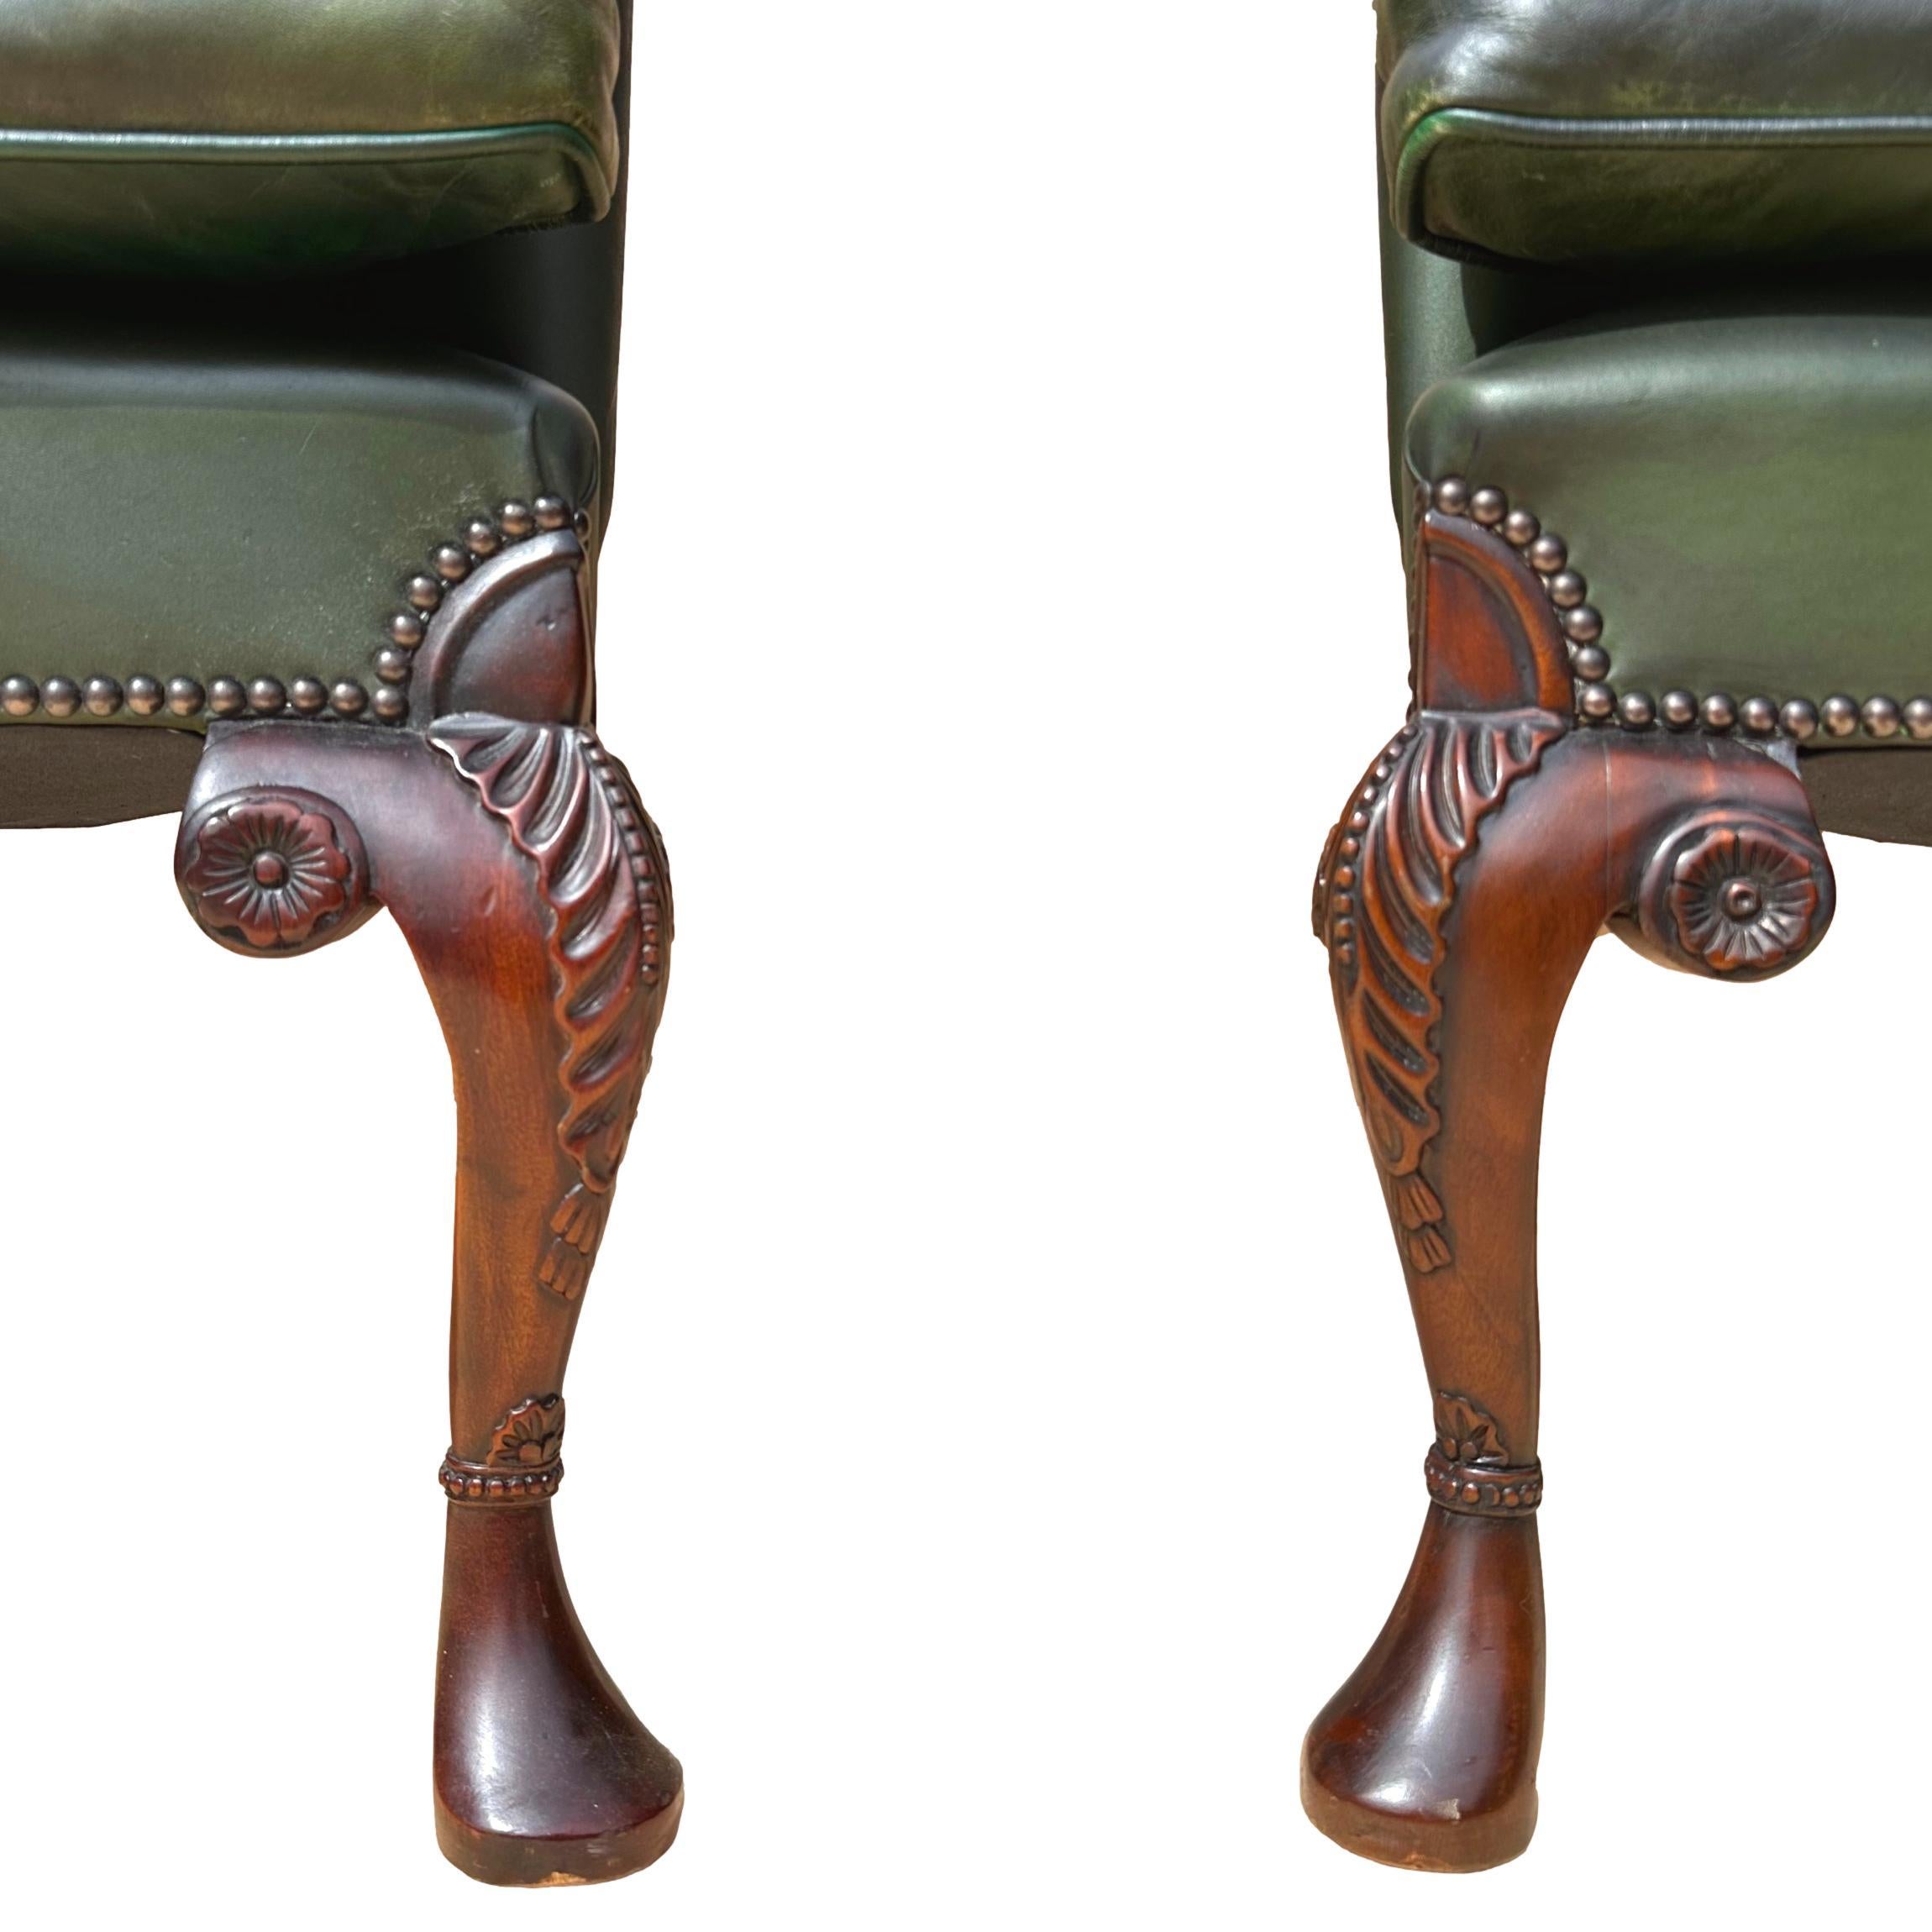 Pair of Edwardian Green Leather Wing Back Chairs, English, ca. 1920. For Sale 5